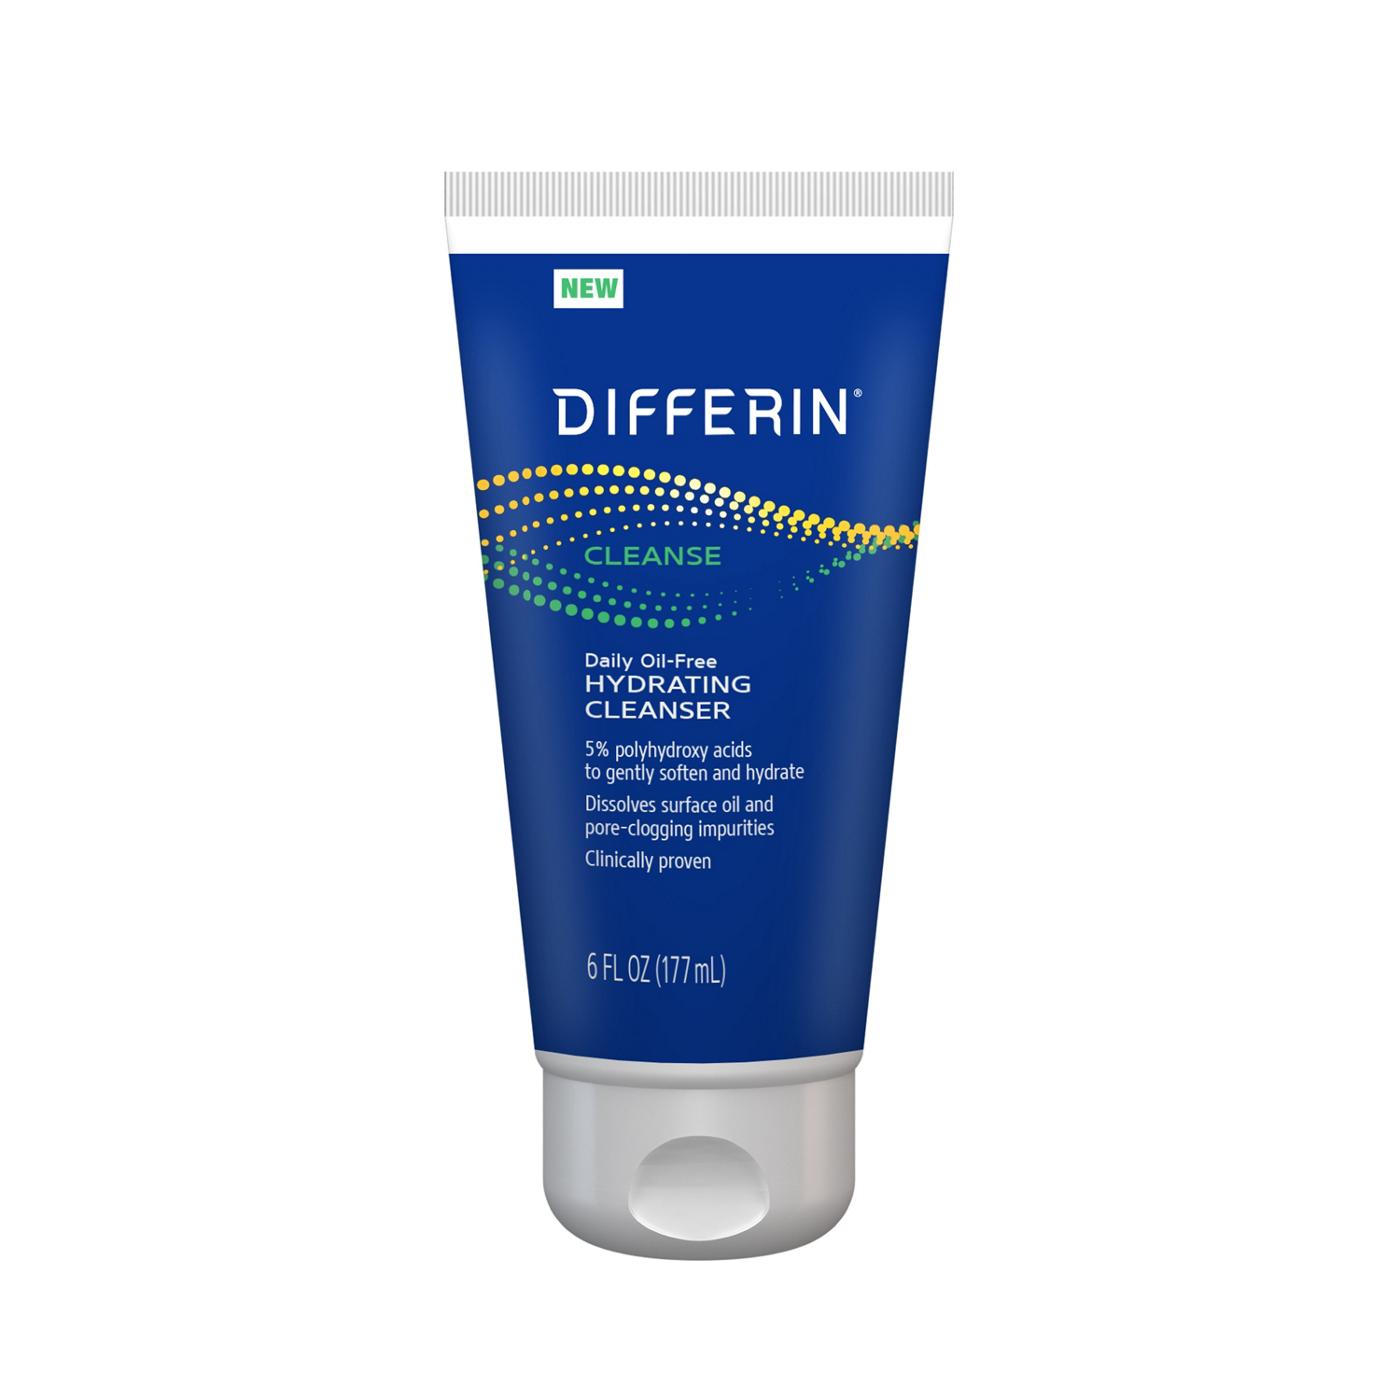 Differin Daily Oil-Free Hydrating Cleanser; image 1 of 5